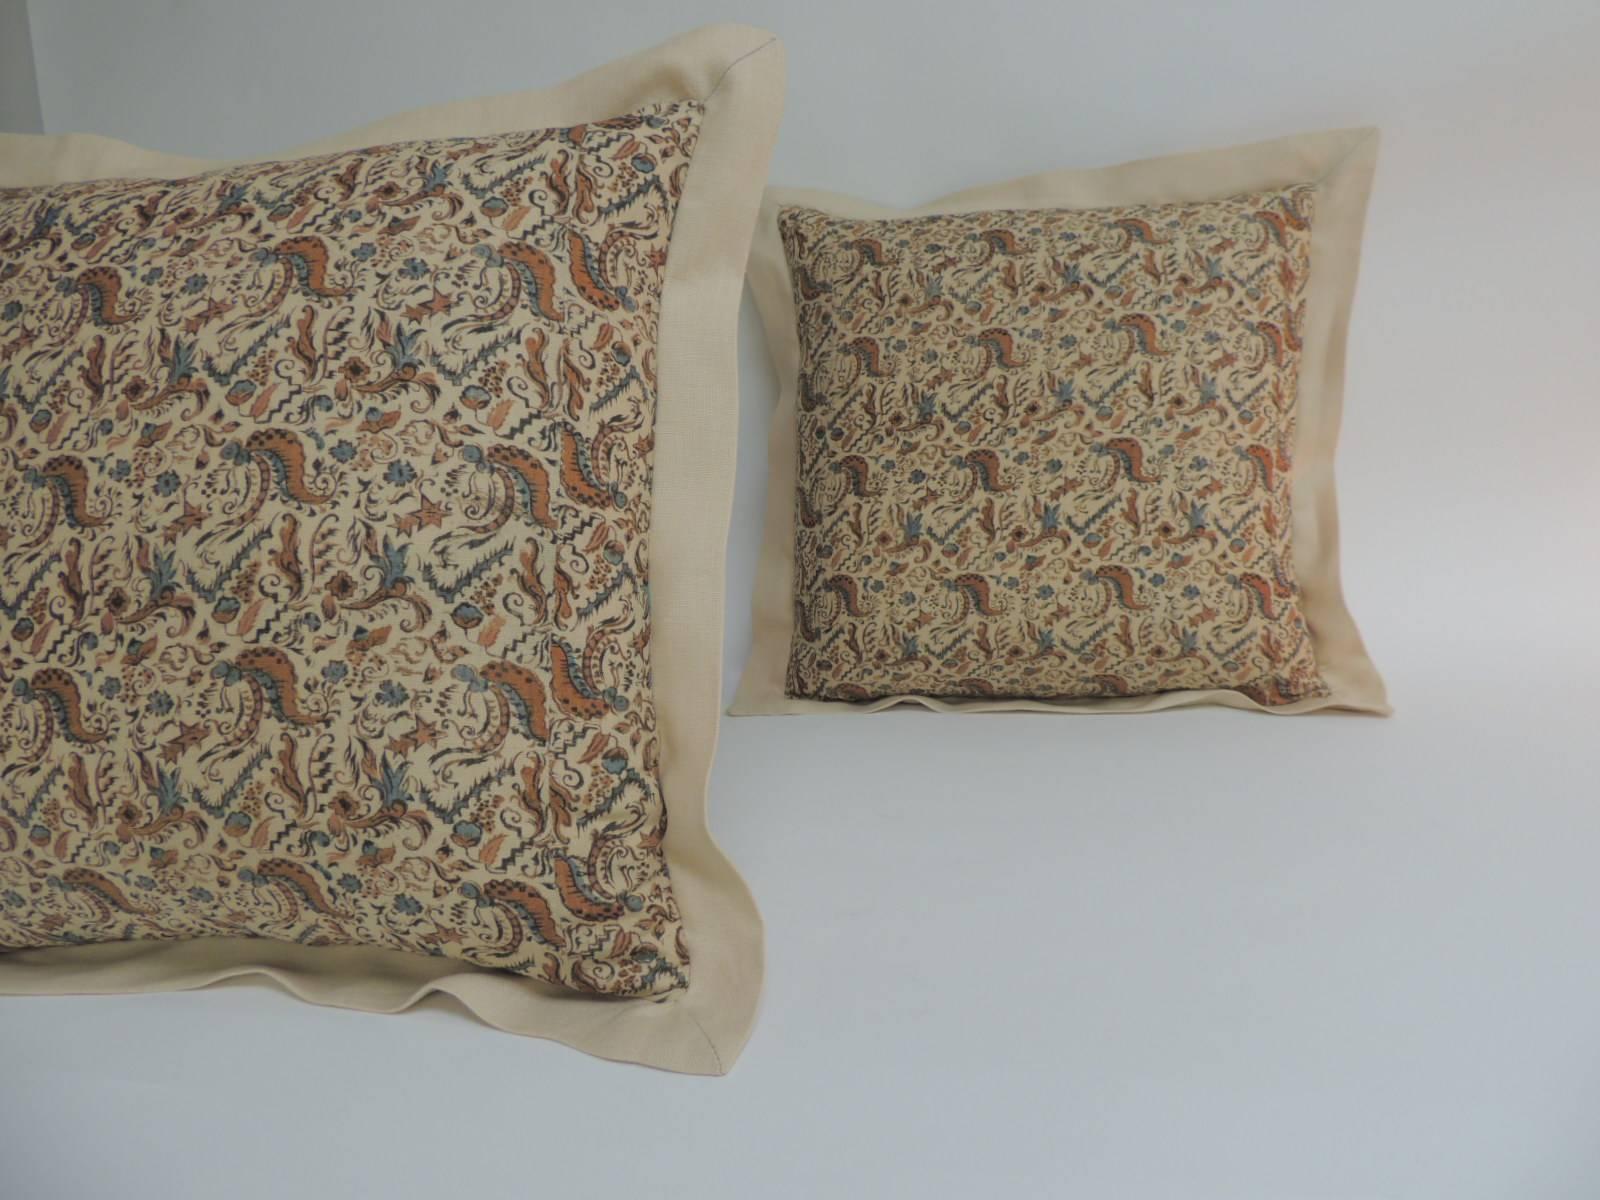 Pair of Arts & Crafts square floral printed linen decorative pillows with A.T.G. custom linen flange. Throw pillows handcrafted with a 19th century textile in shades of soft yellow linen same as backing. Color palette in the antique yellow textile